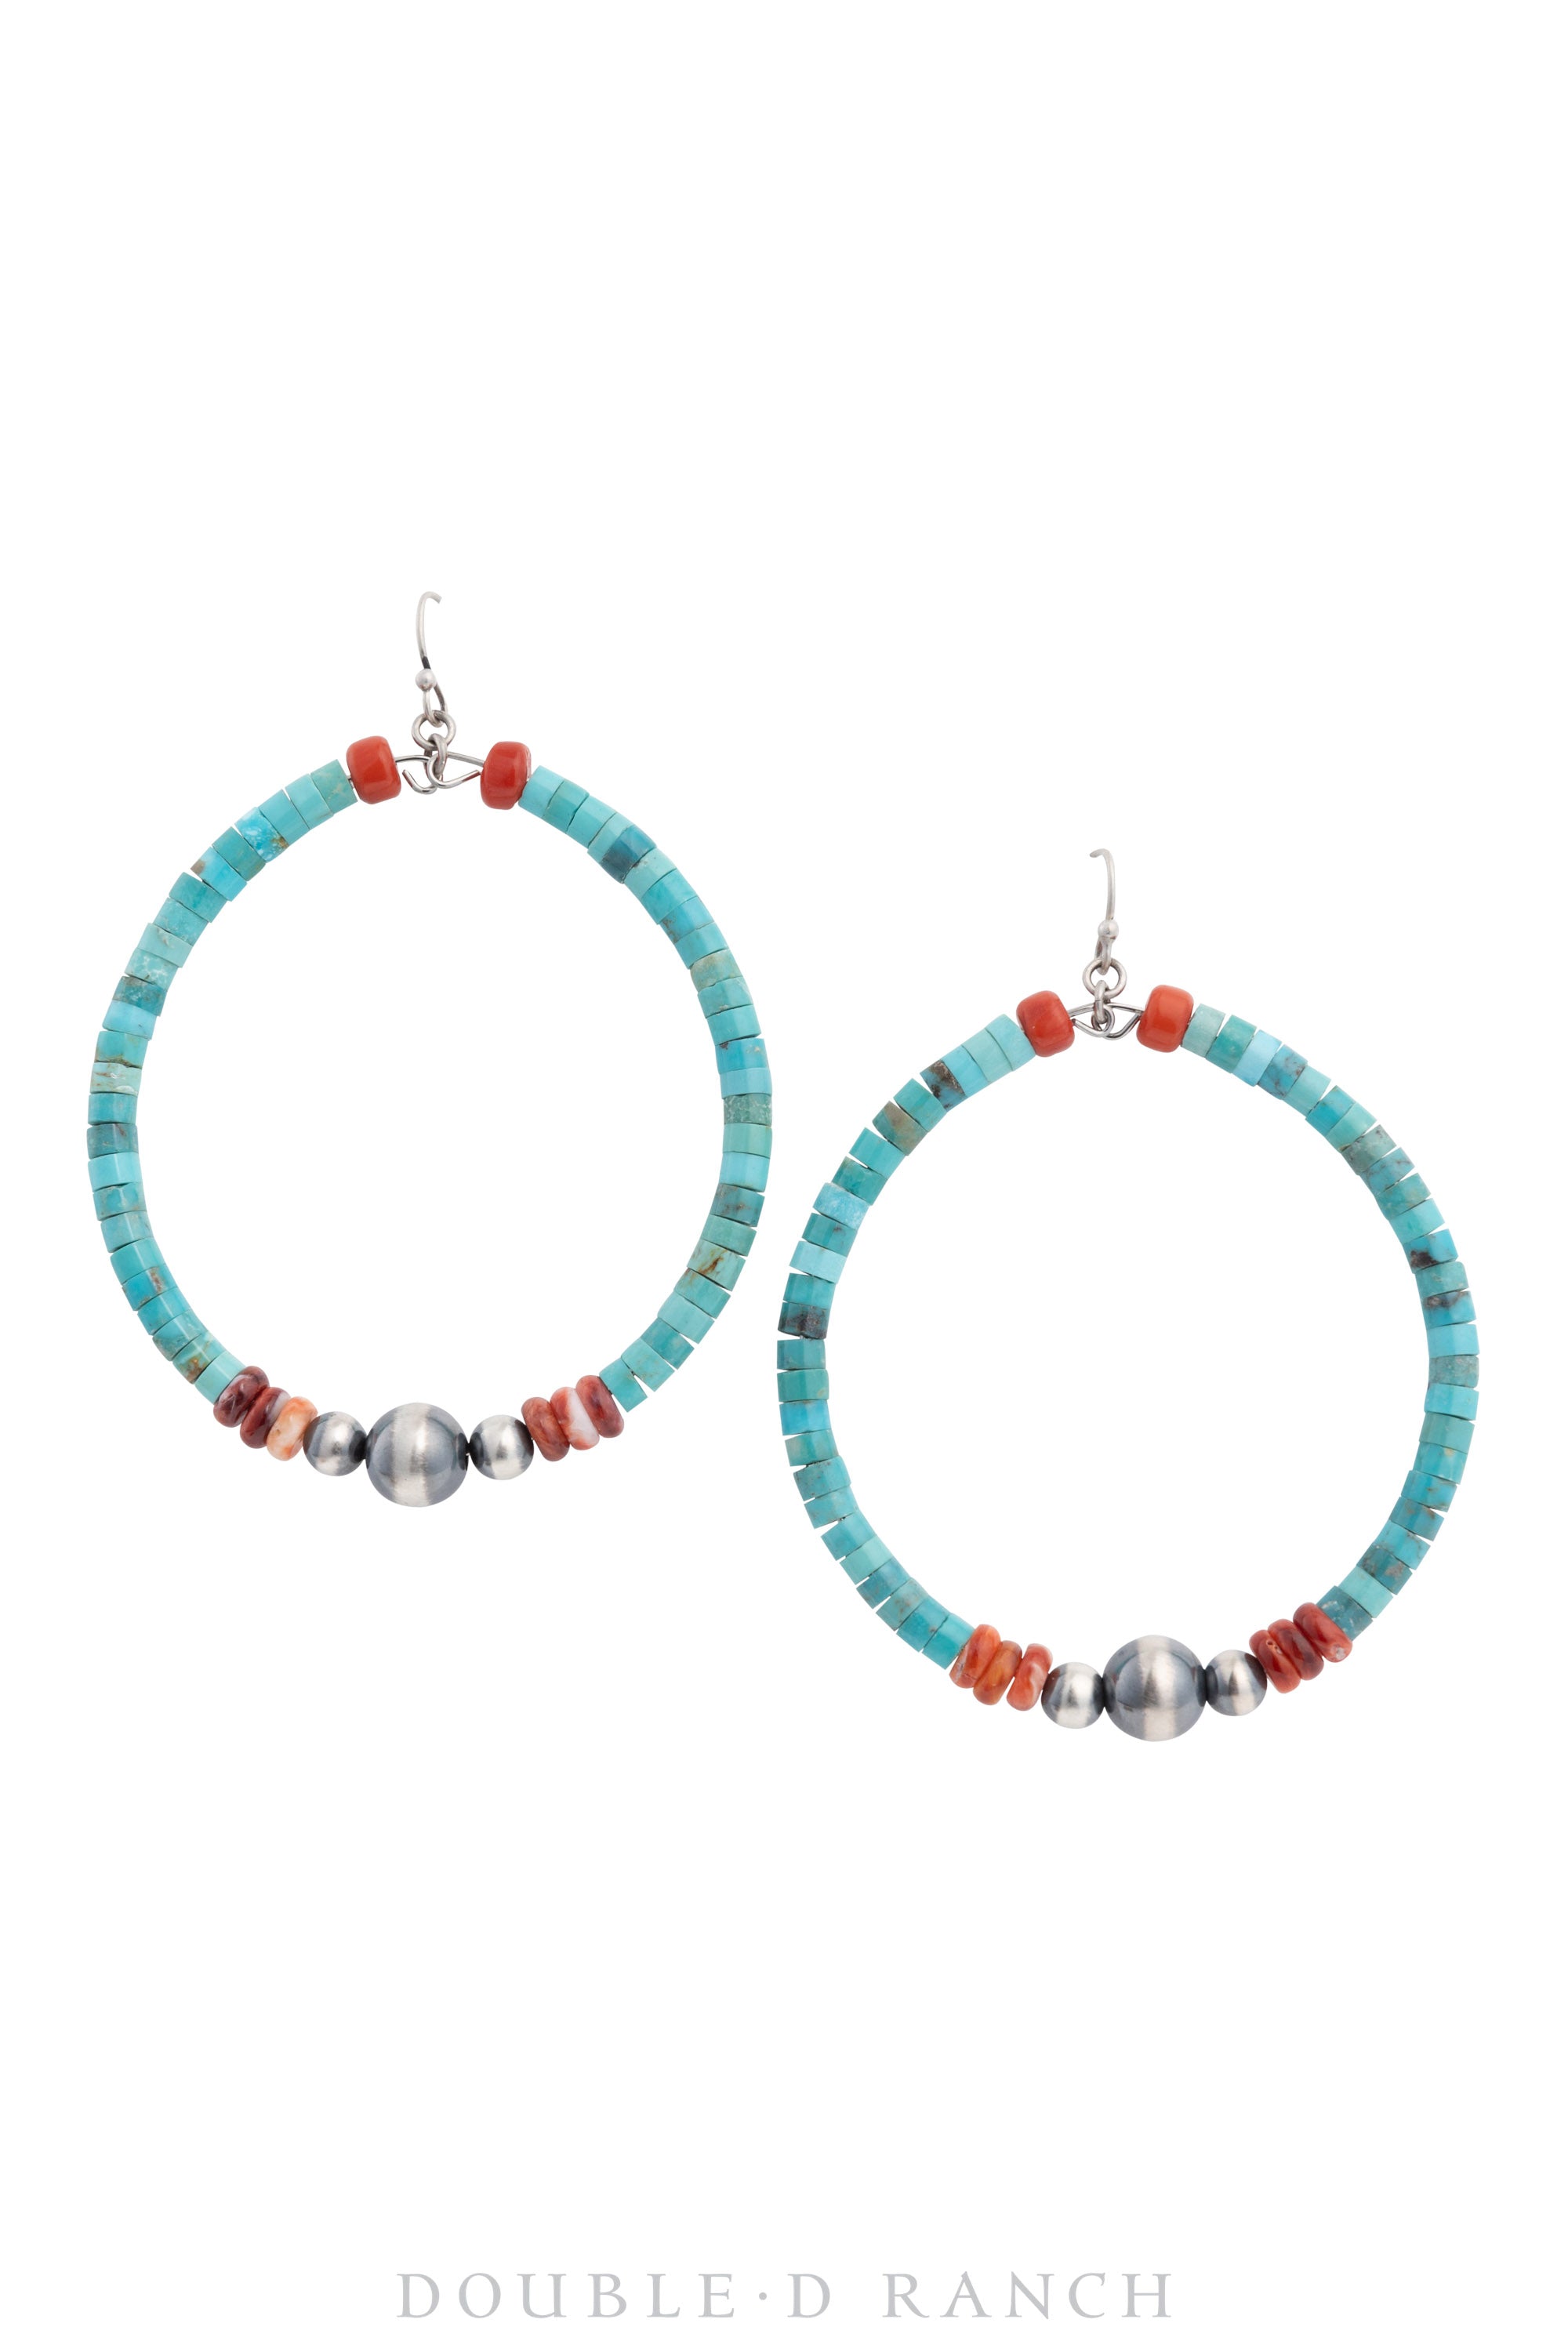 Earrings, Hoop, Turquoise & Mixed Stones, Heishi, Contemporary, 1461